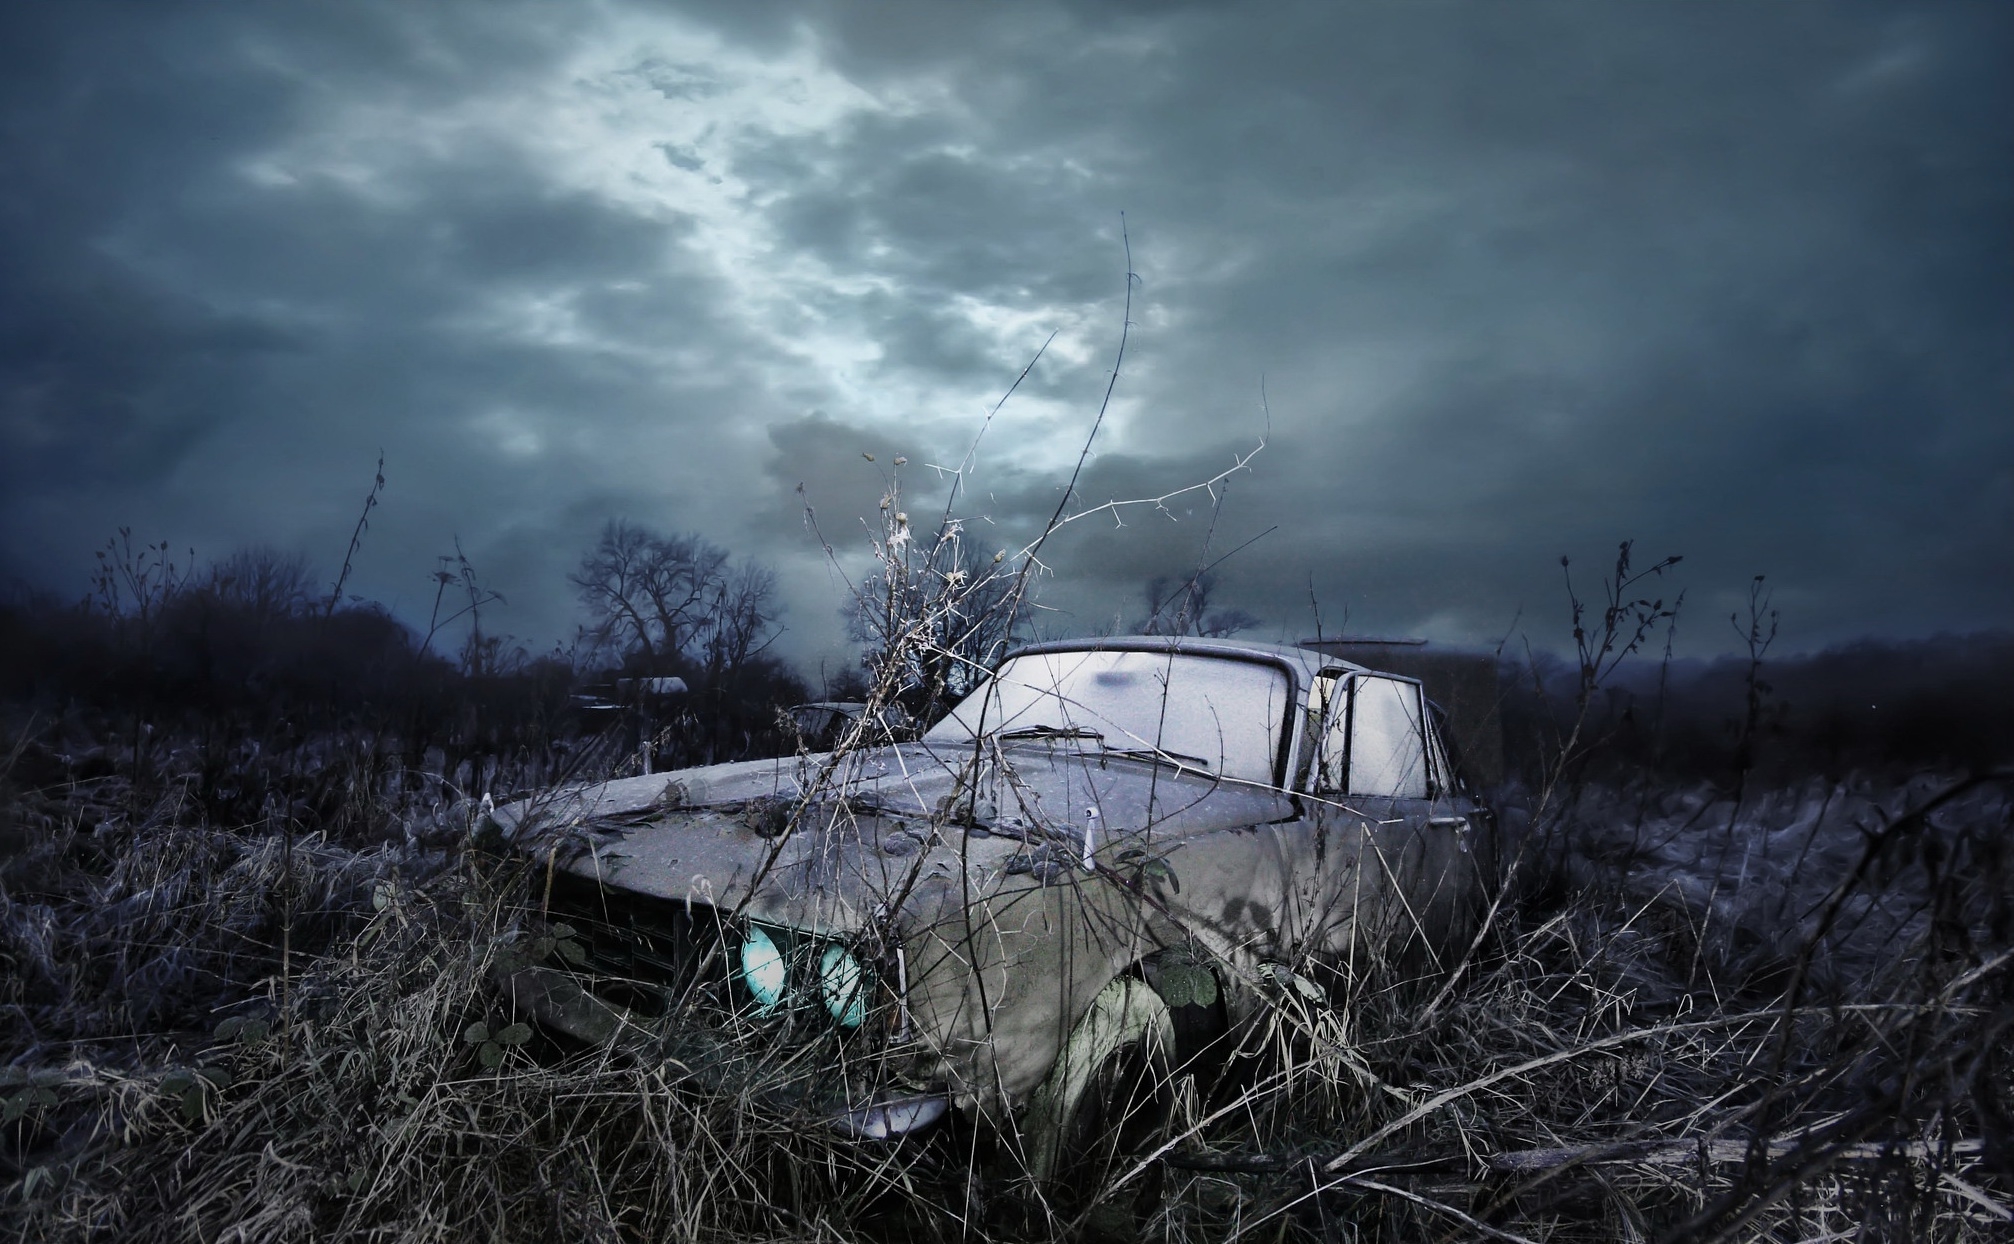 An abandoned car stands in a field in bad weather